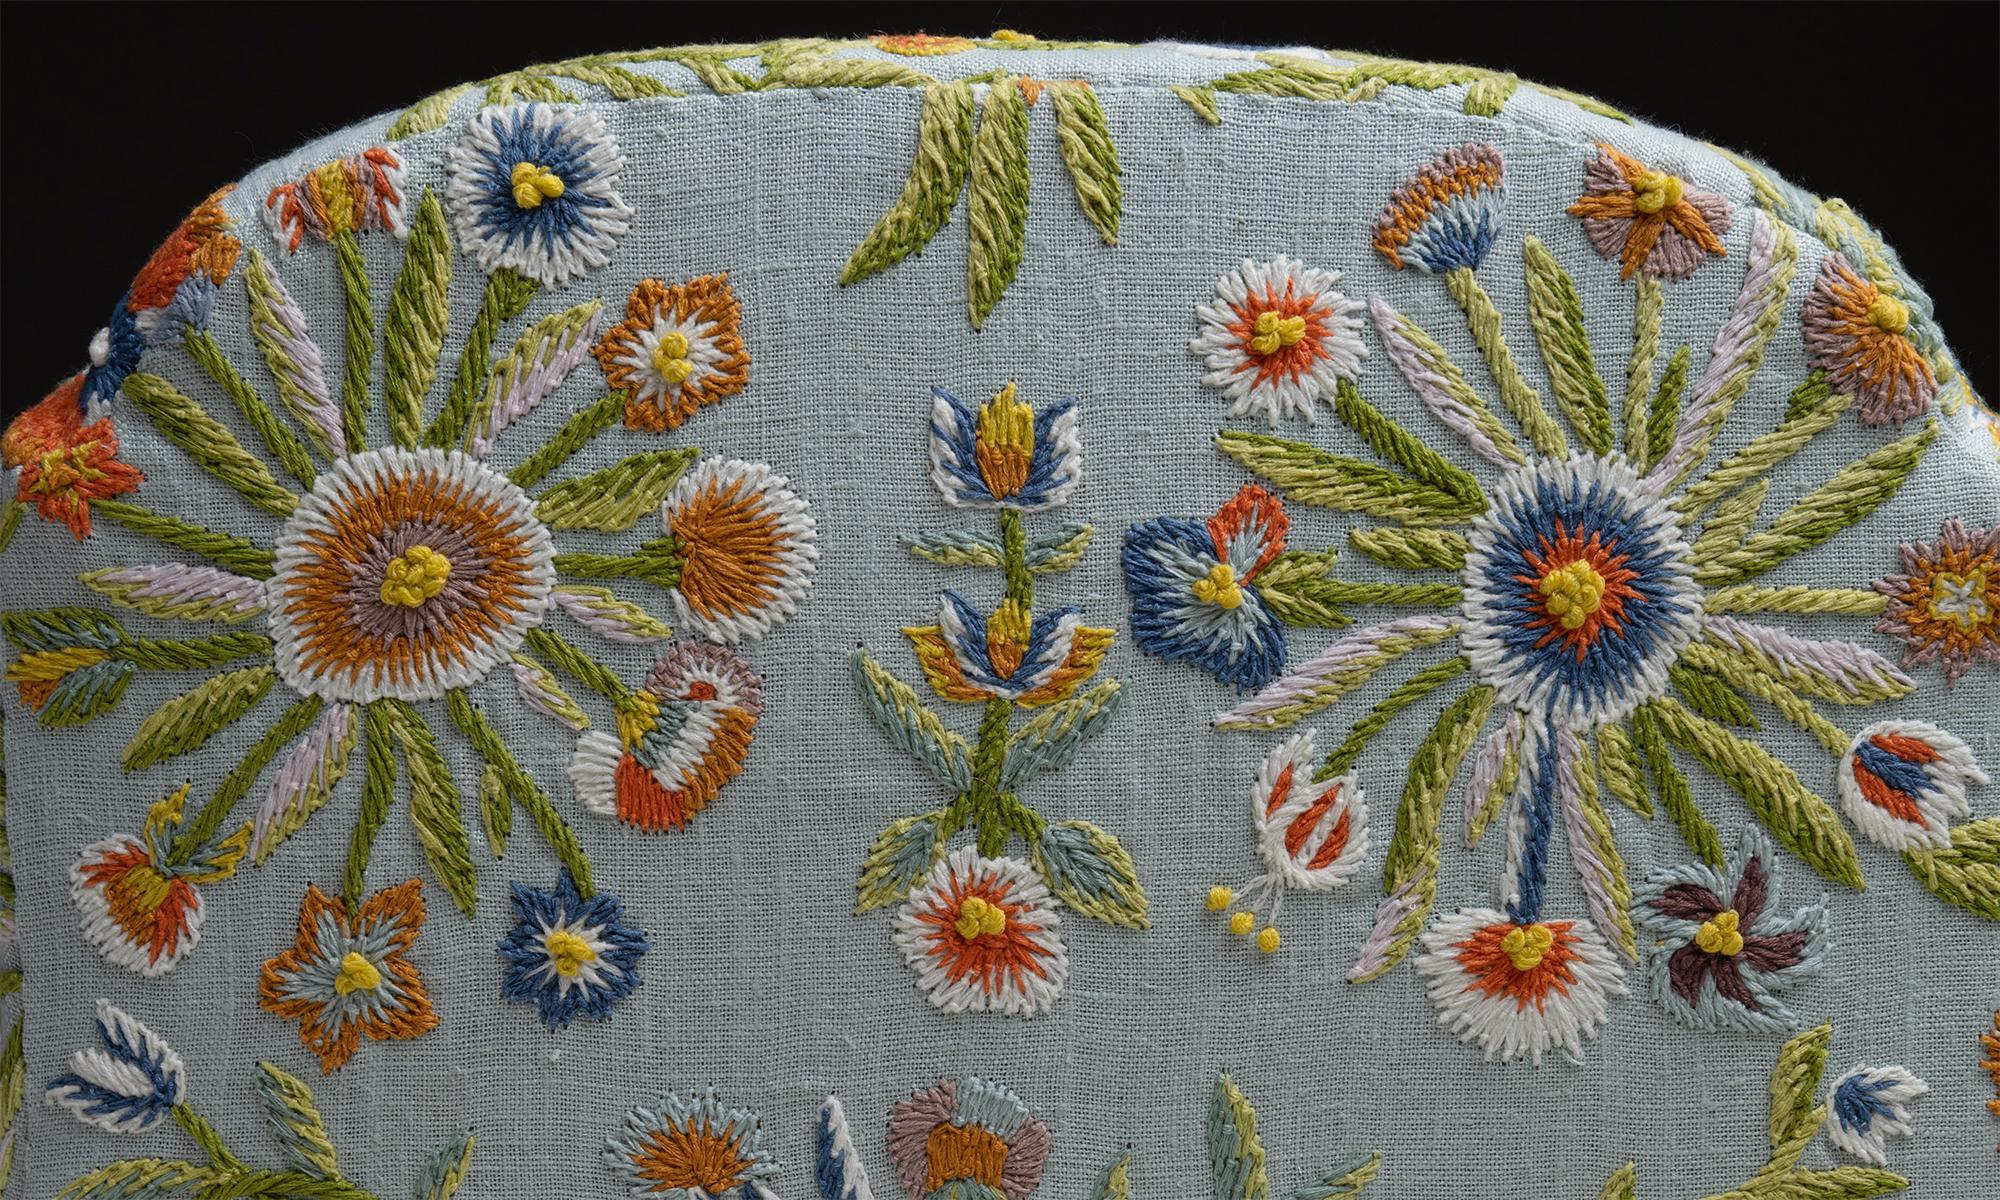 embroidered arm chair